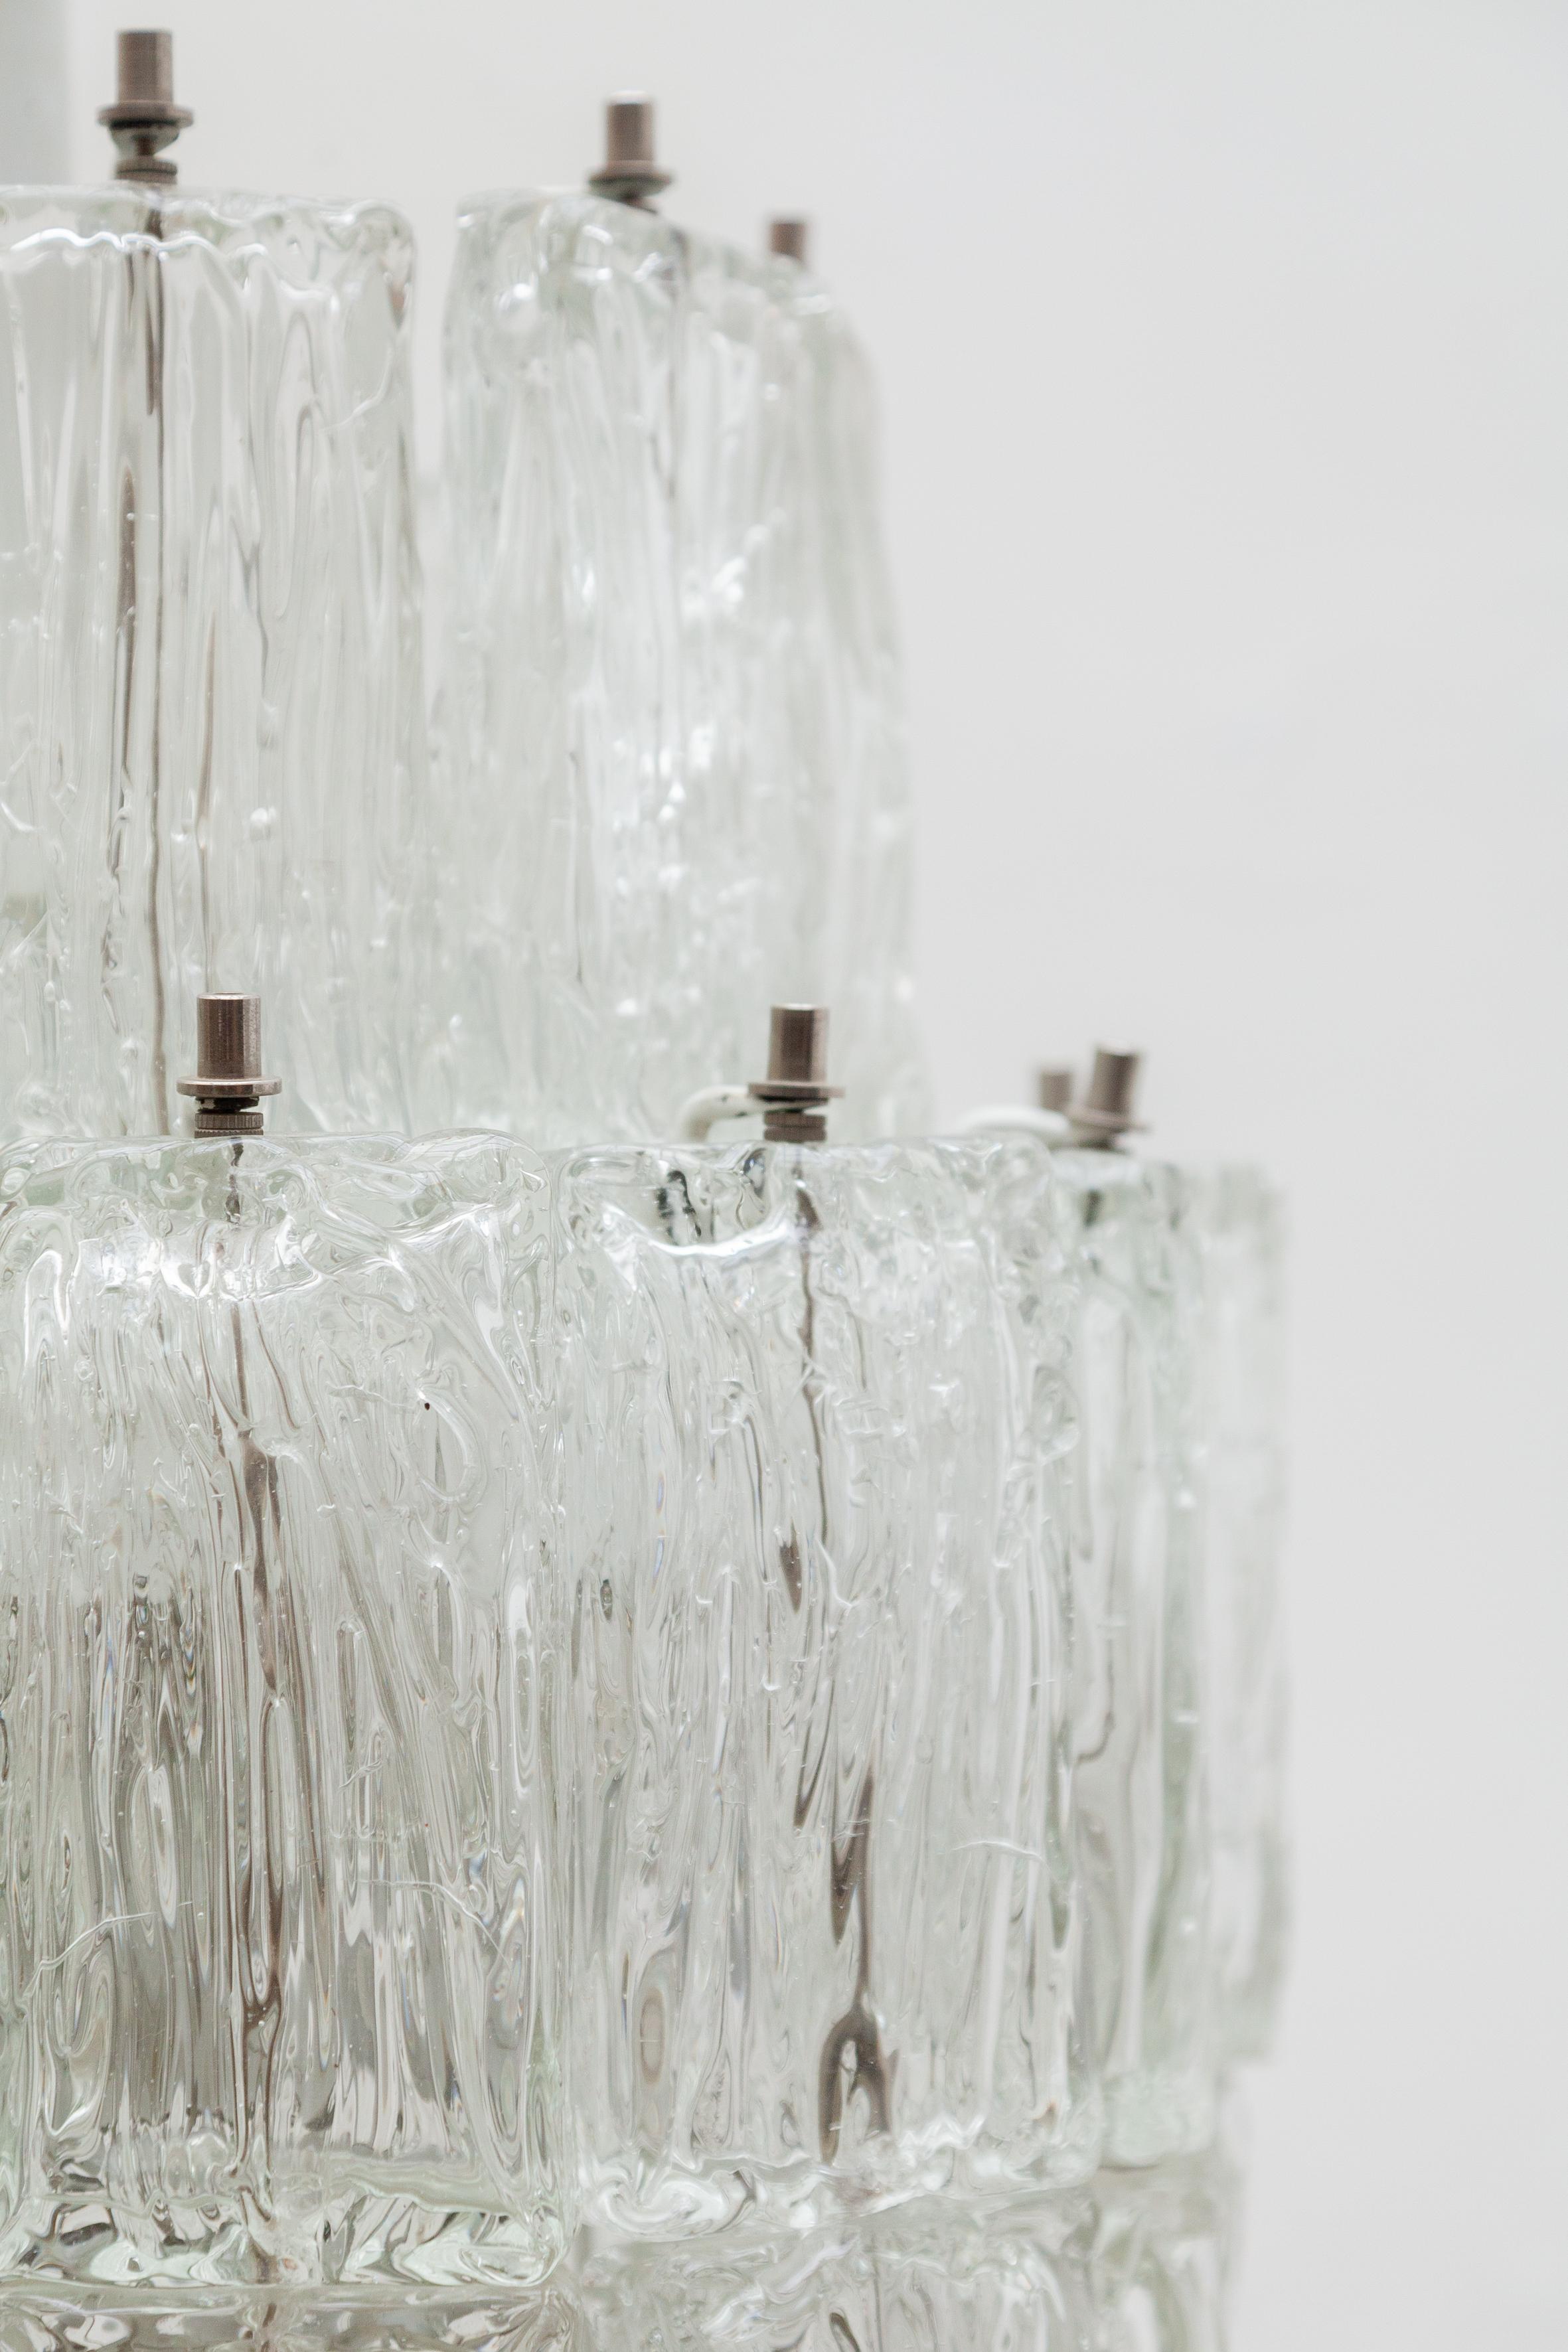 Italian Venini Large Chandelier Iced Textured Clear Glass Five Tiers 1960s Murano, Italy